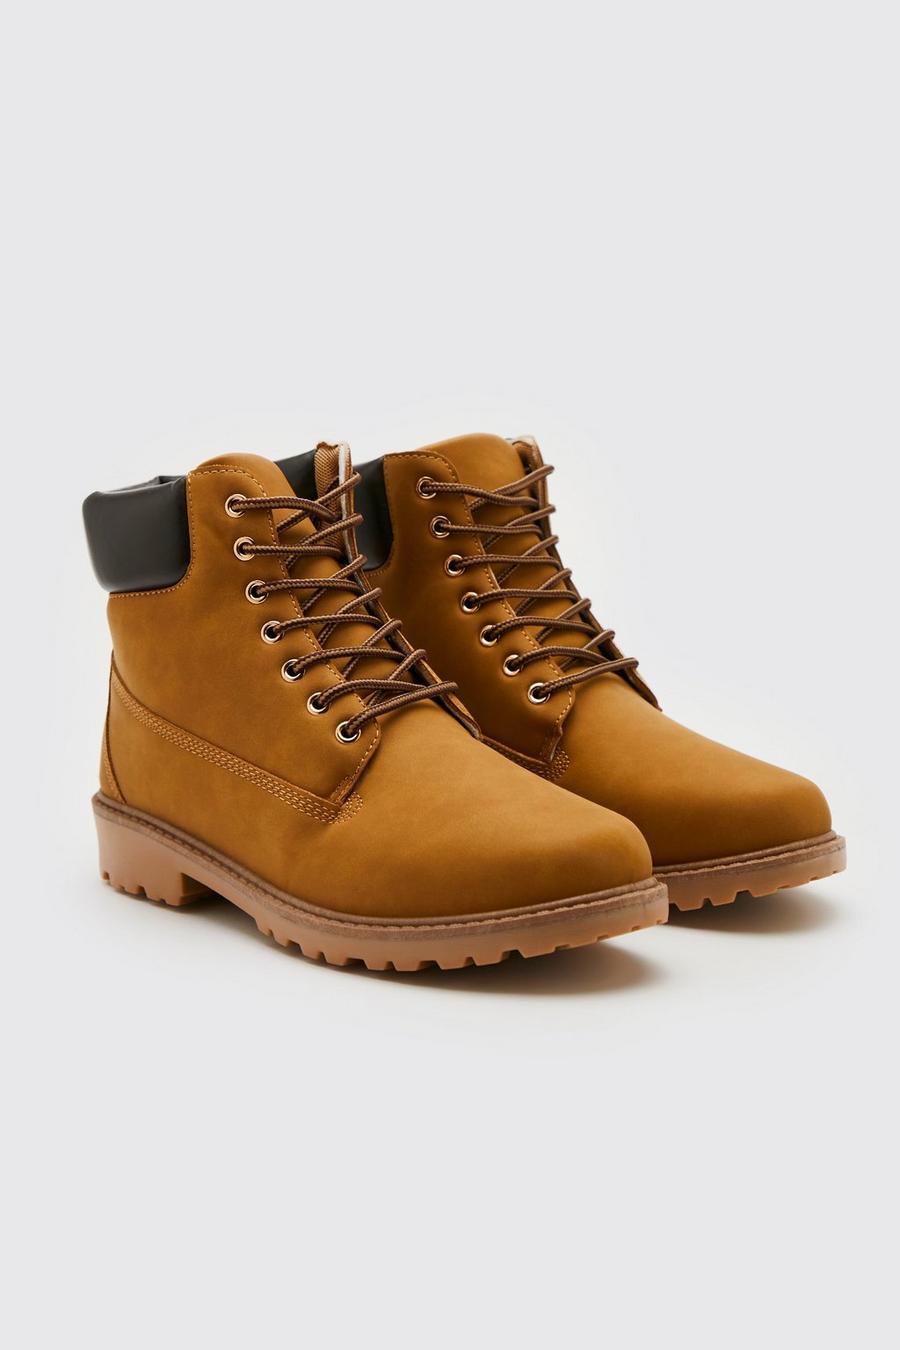 Men's Boots | Men's Ankle, Winter & Dress Boots | boohoo USA